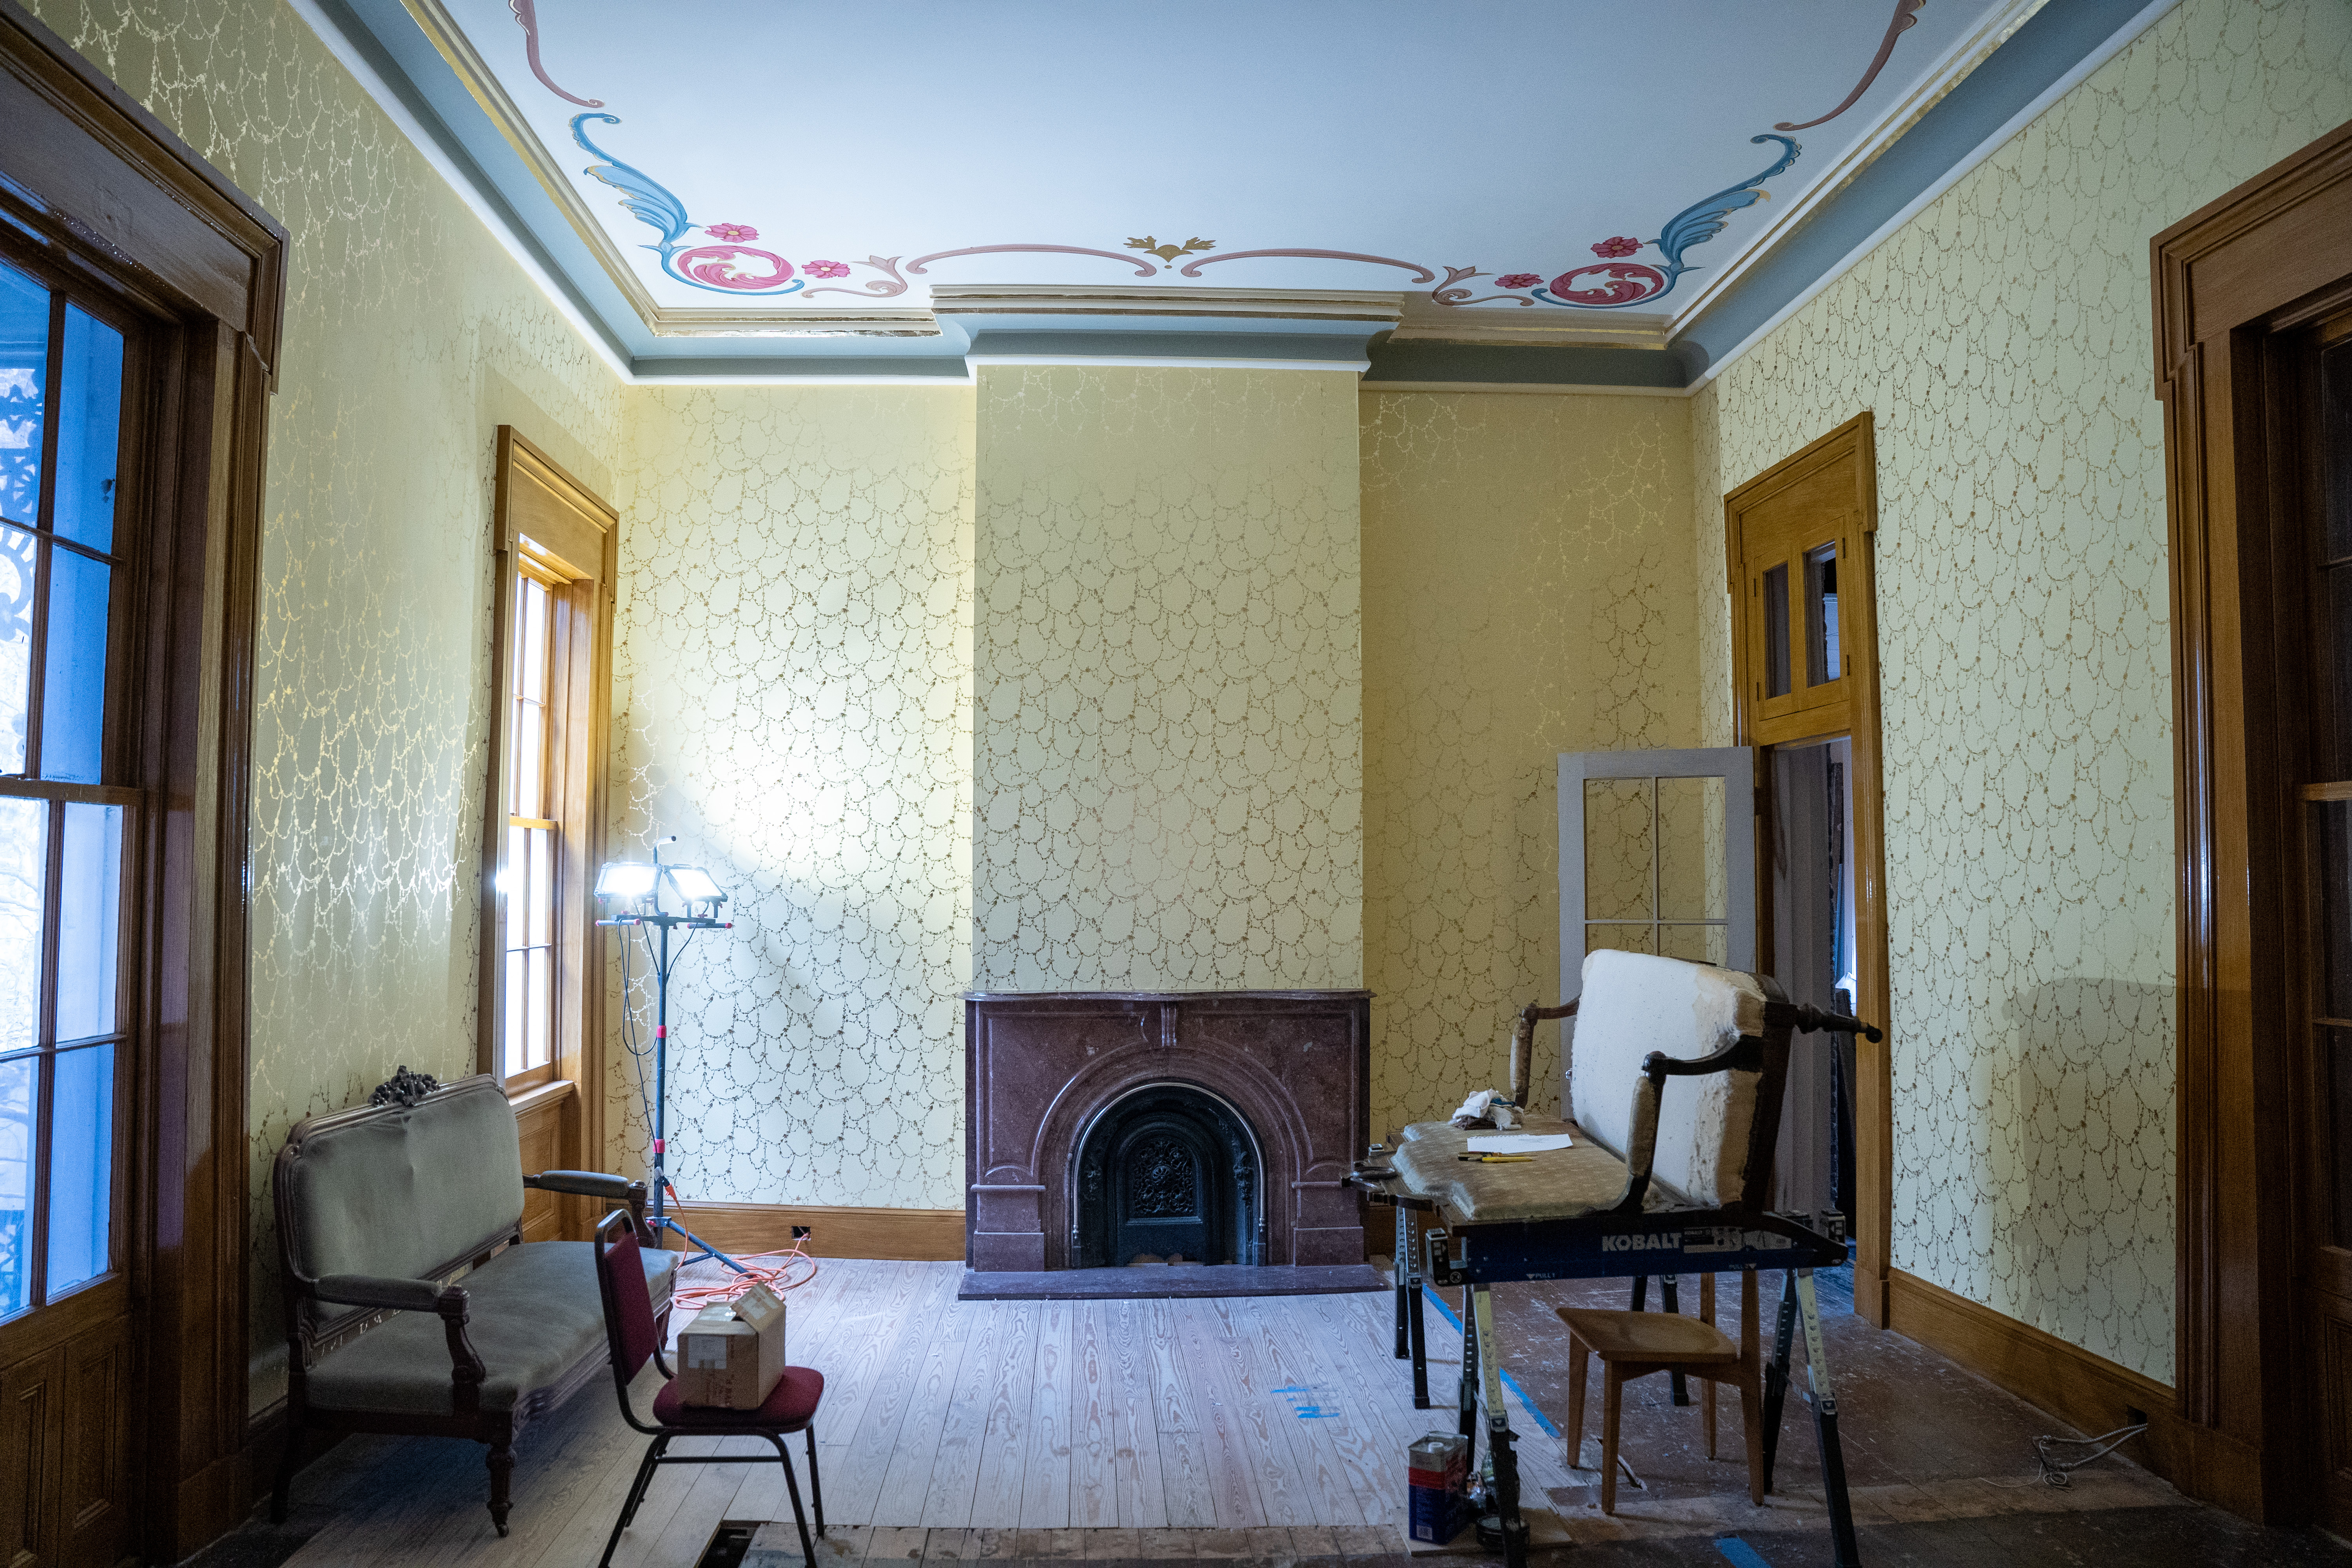 full shot of the billiard room, showcasing the new wallpaper and the mantel